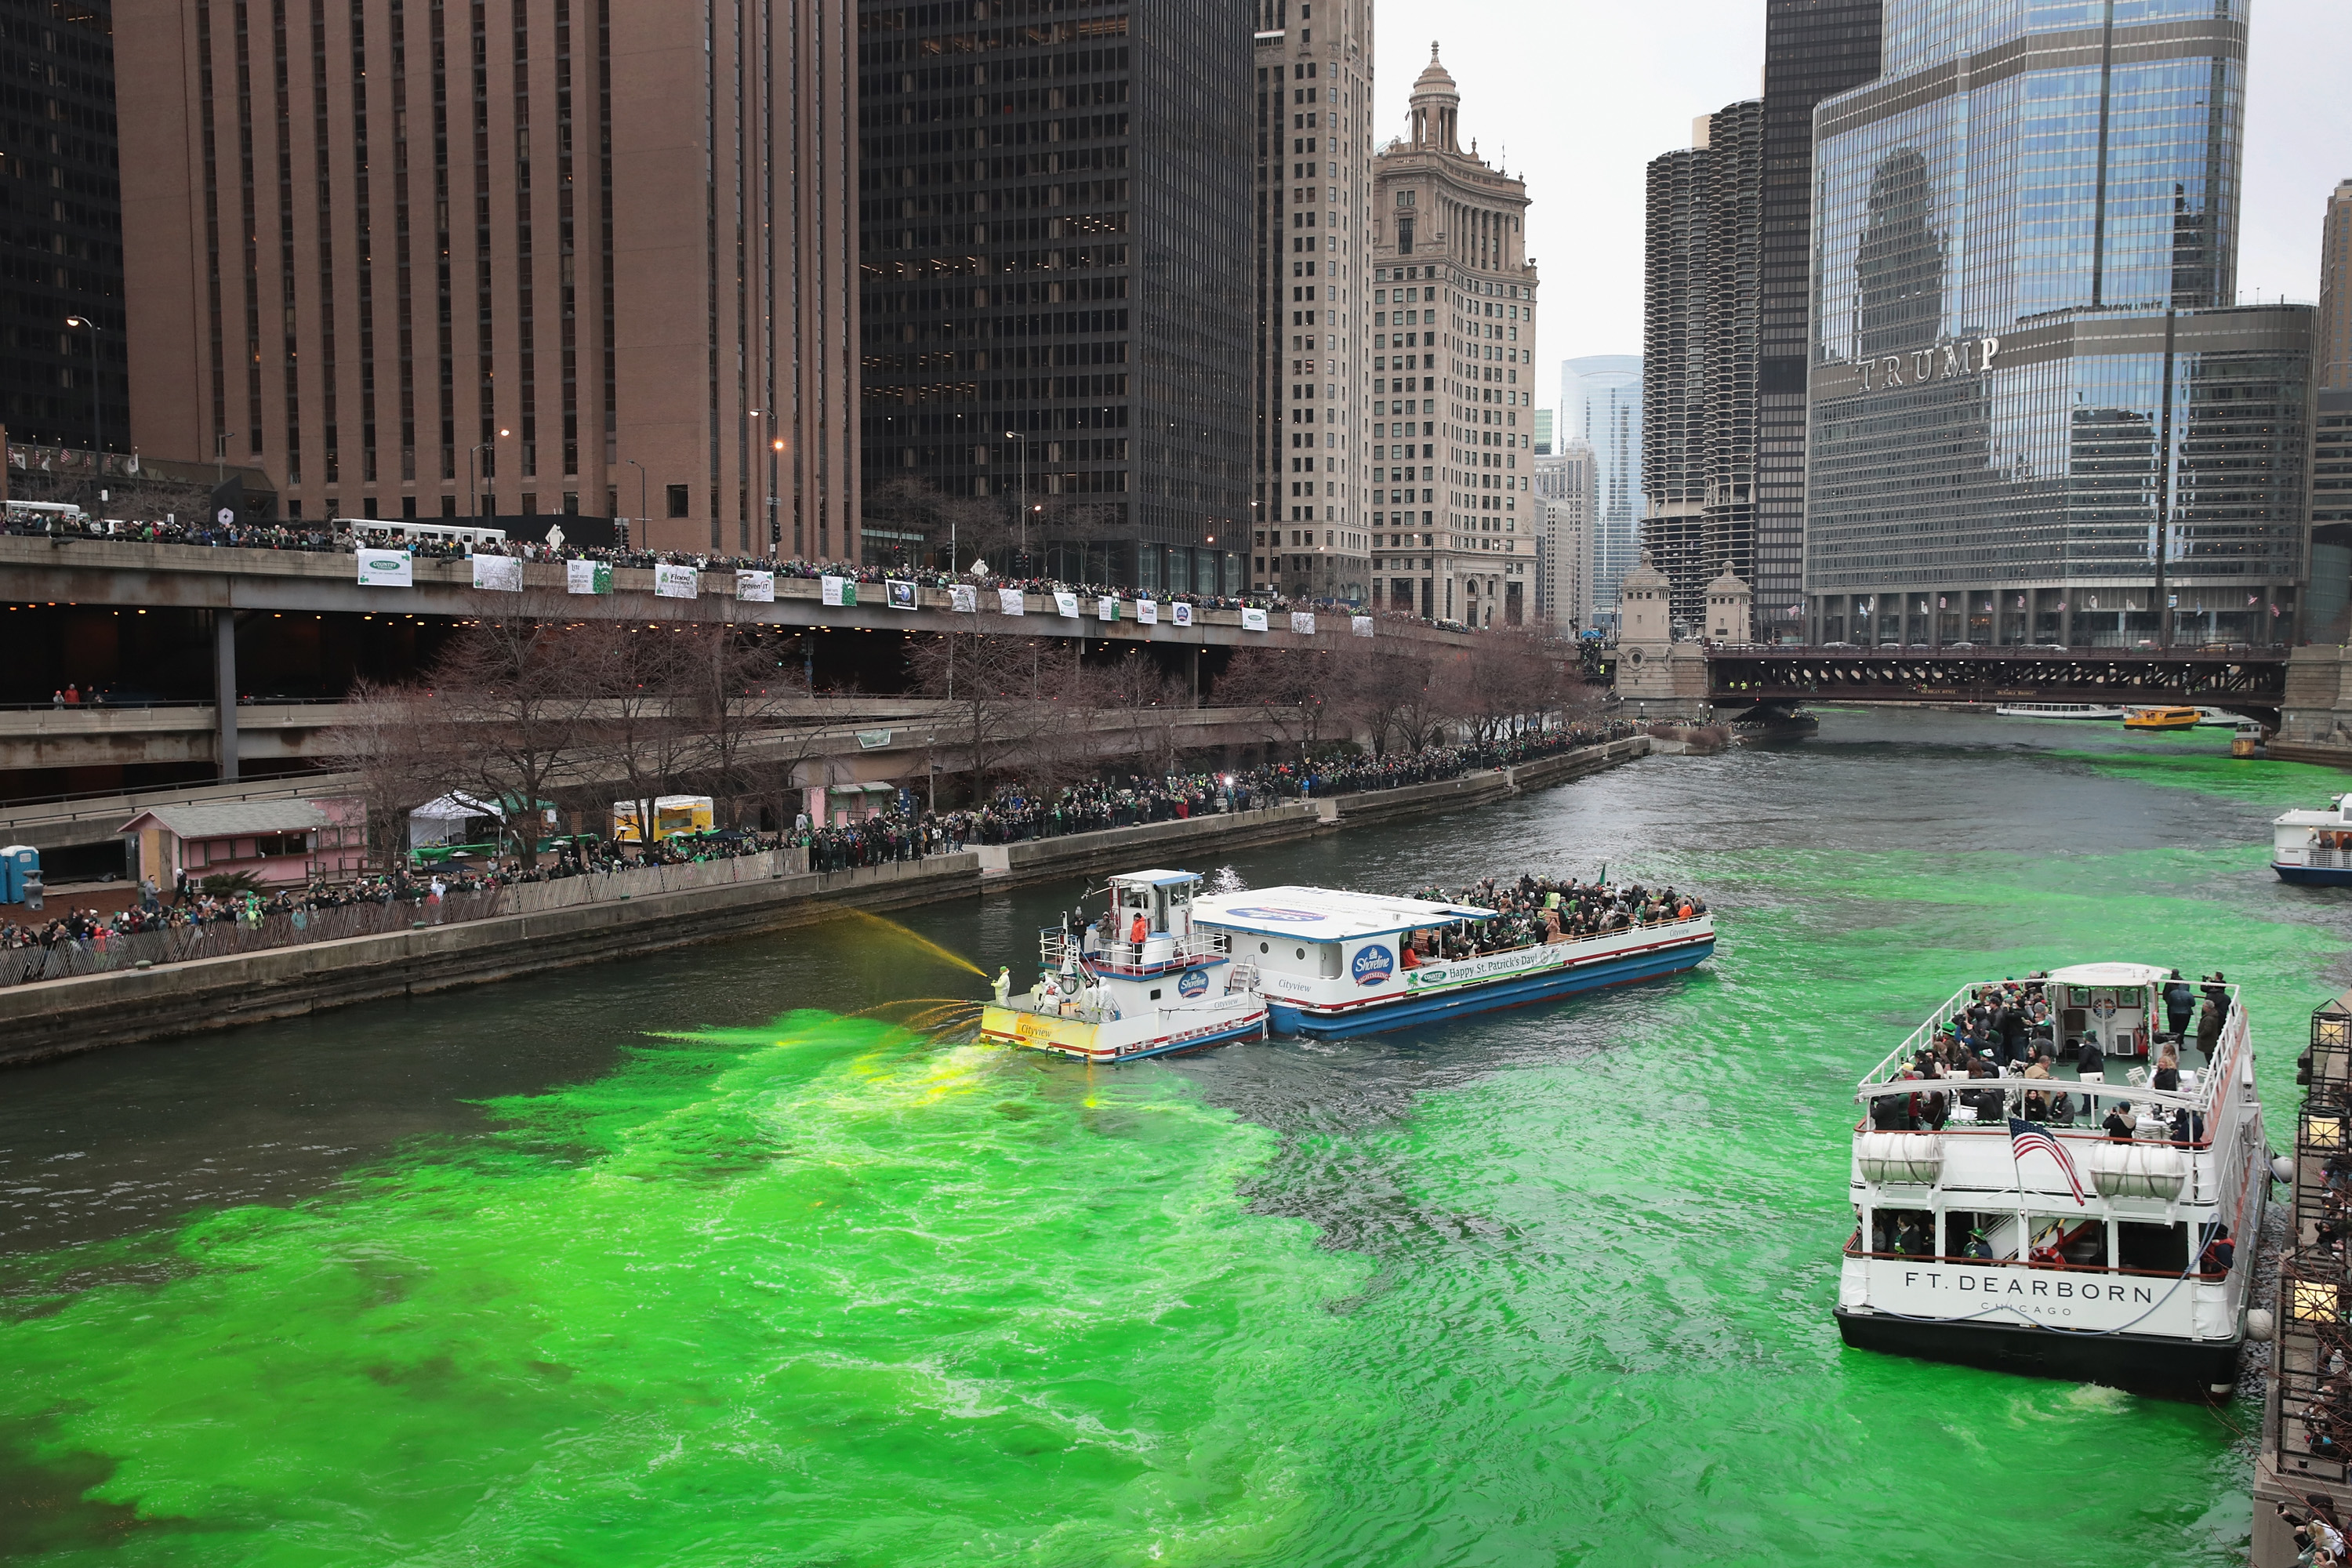 CHICAGO, IL - MARCH 17: Members of the local plumber's union dye the Chicago River green in celebration of St. Patrick's Day (Photo by Scott Olson/Getty Images)